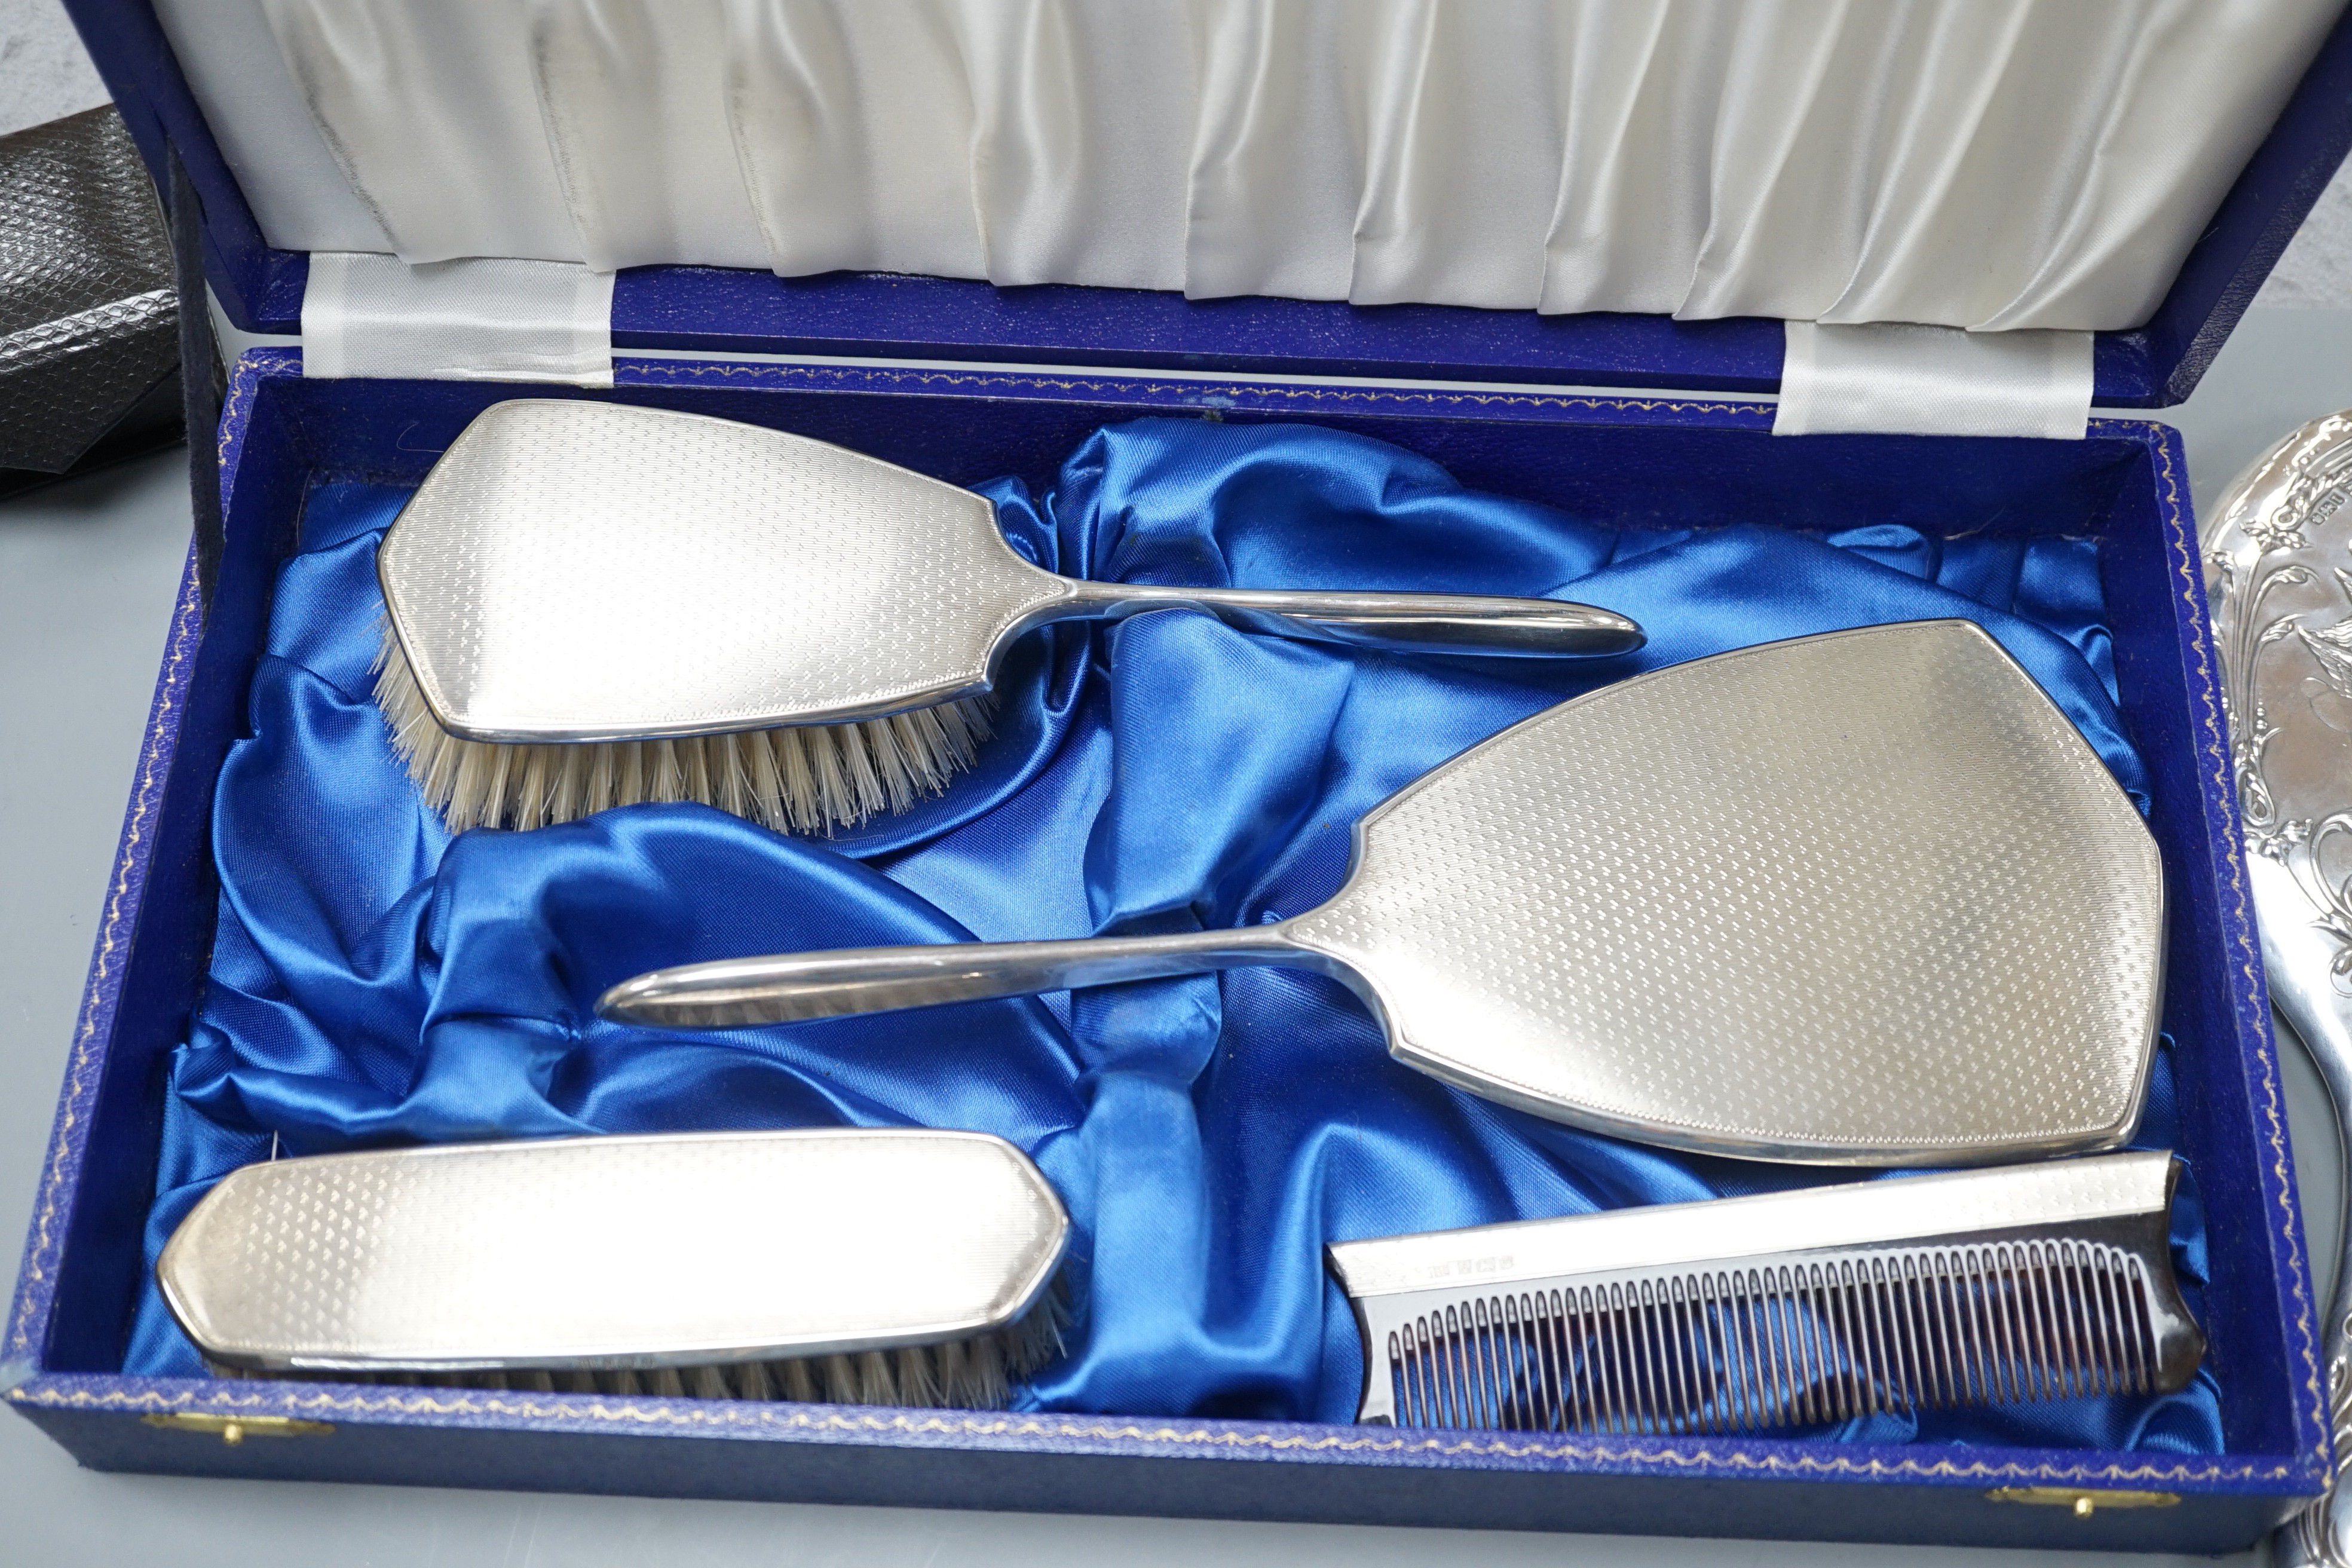 A cae 1970's engine turned silver mounted four piece mirror and brush set, two silver mounted hand mirrors and two silver mounted brushes.